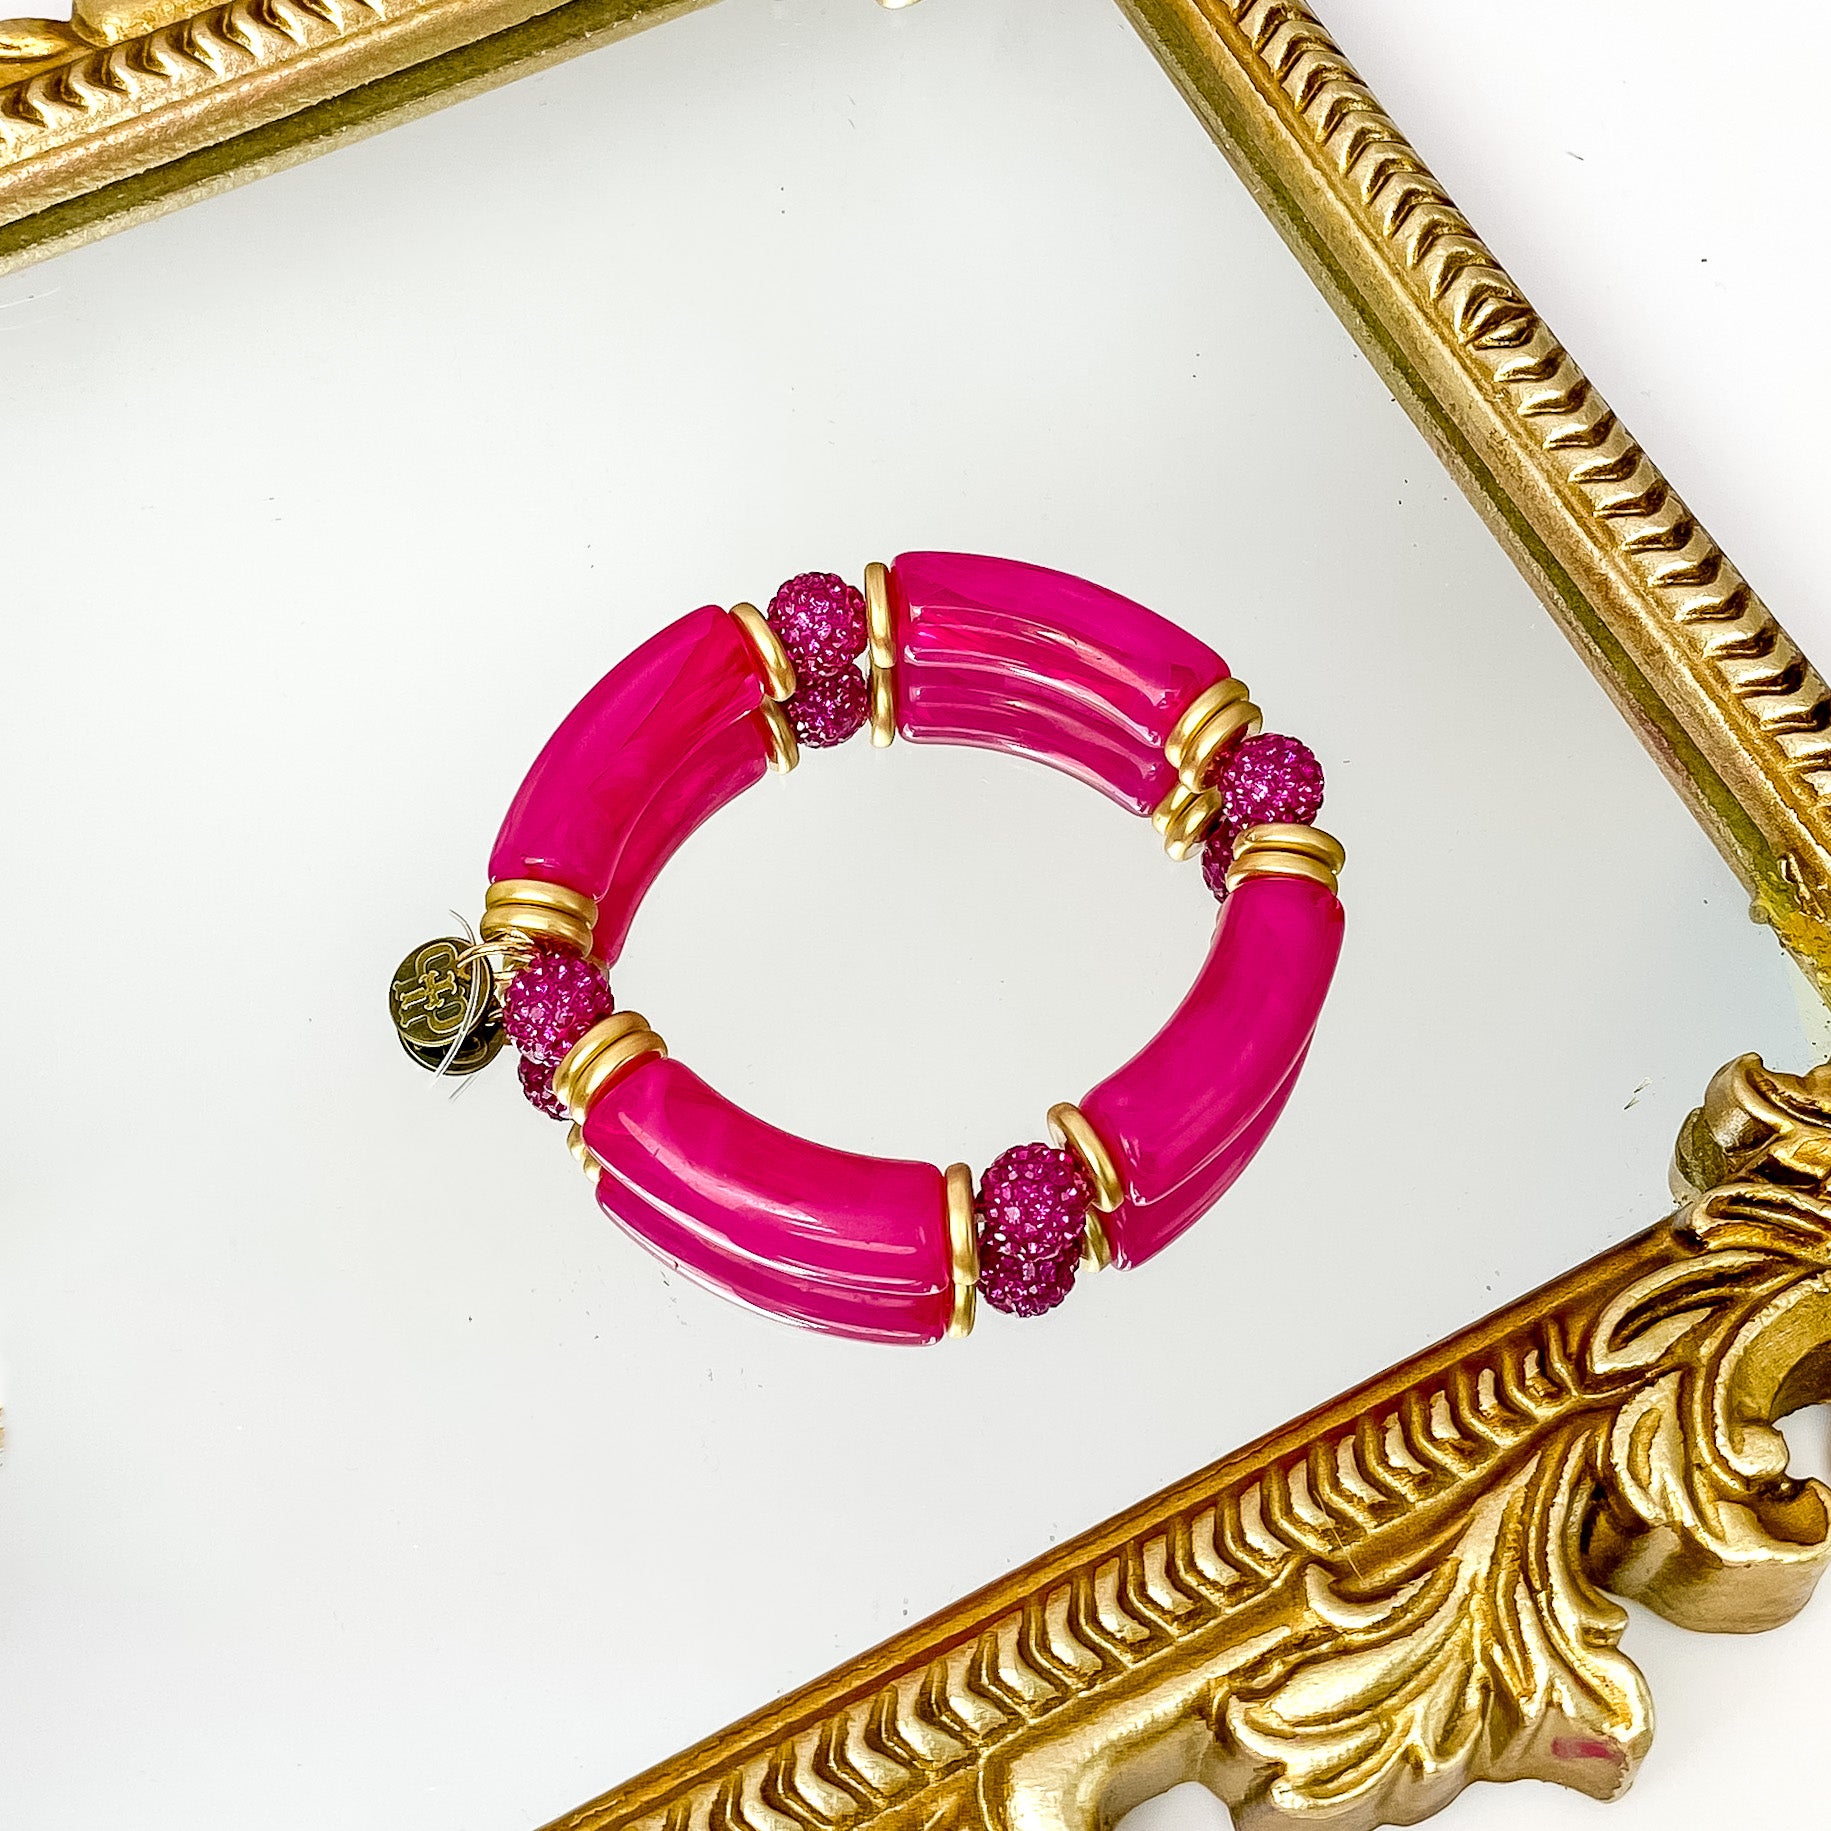 Fuchsia marbled tube bangle with gold beaded spacers. This bracelet also includes round, fuchsia crystal beads. This bracelet is pictured on a gold mirror and on a white background.